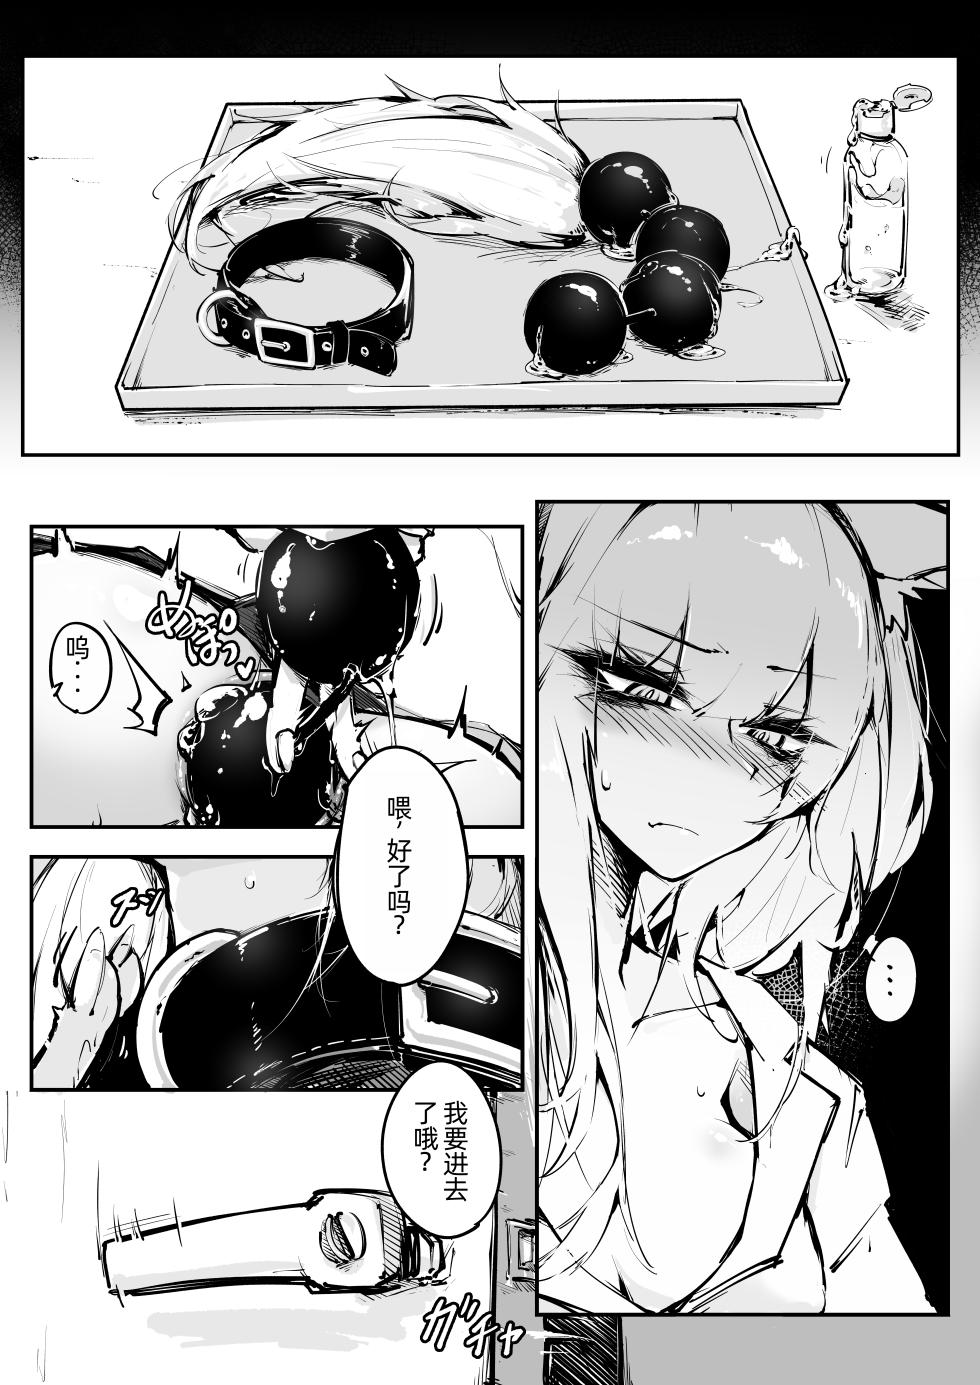 [RKZROK] Doujin_KxW (01-13p) (Arknights) [Chinese] [Ongoing] - Page 1